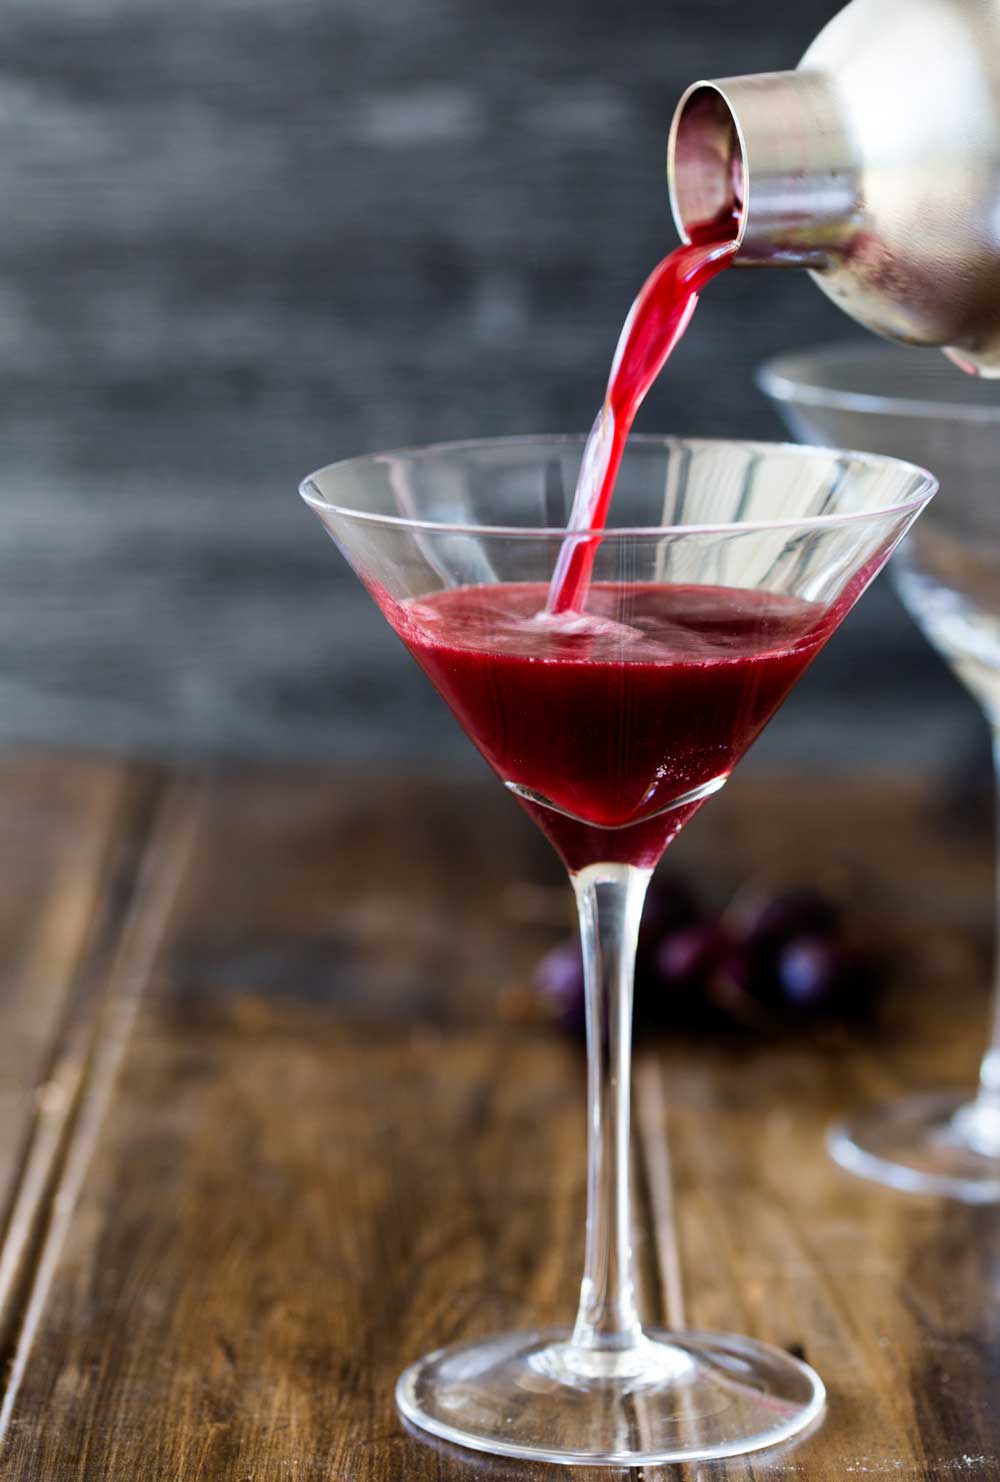 This cherrytini is the perfect fruity martini! It tastes like an adult version of cherry drop sweets. Packed with cherry flavour and pulling a great alcoholic punch. 